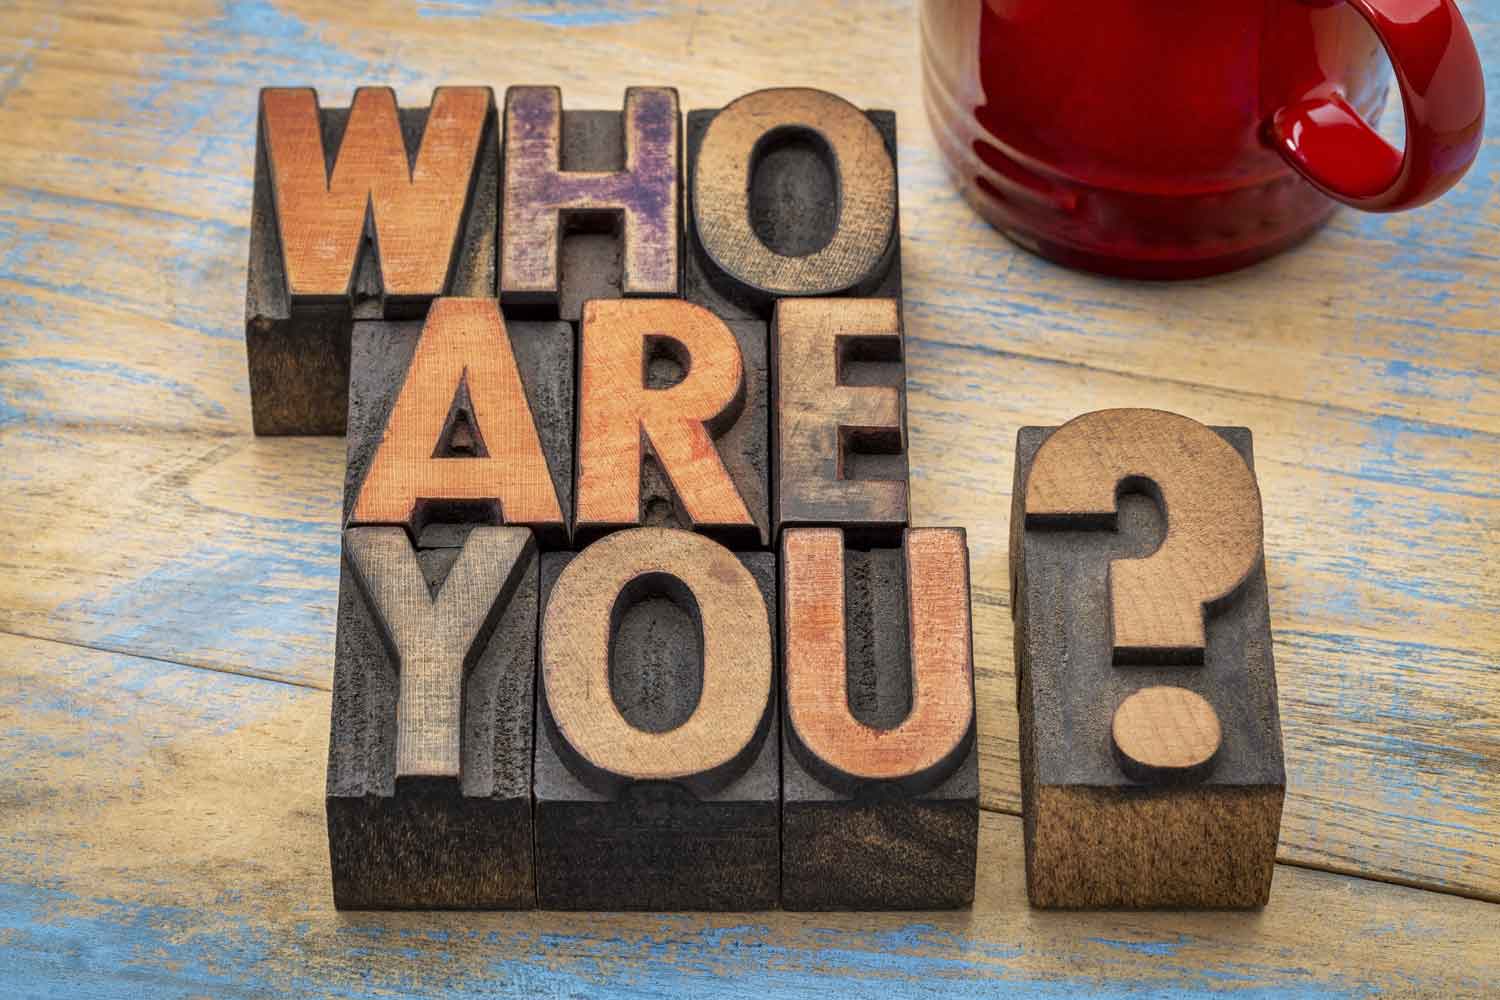 Who are you? Brand Building Part 2